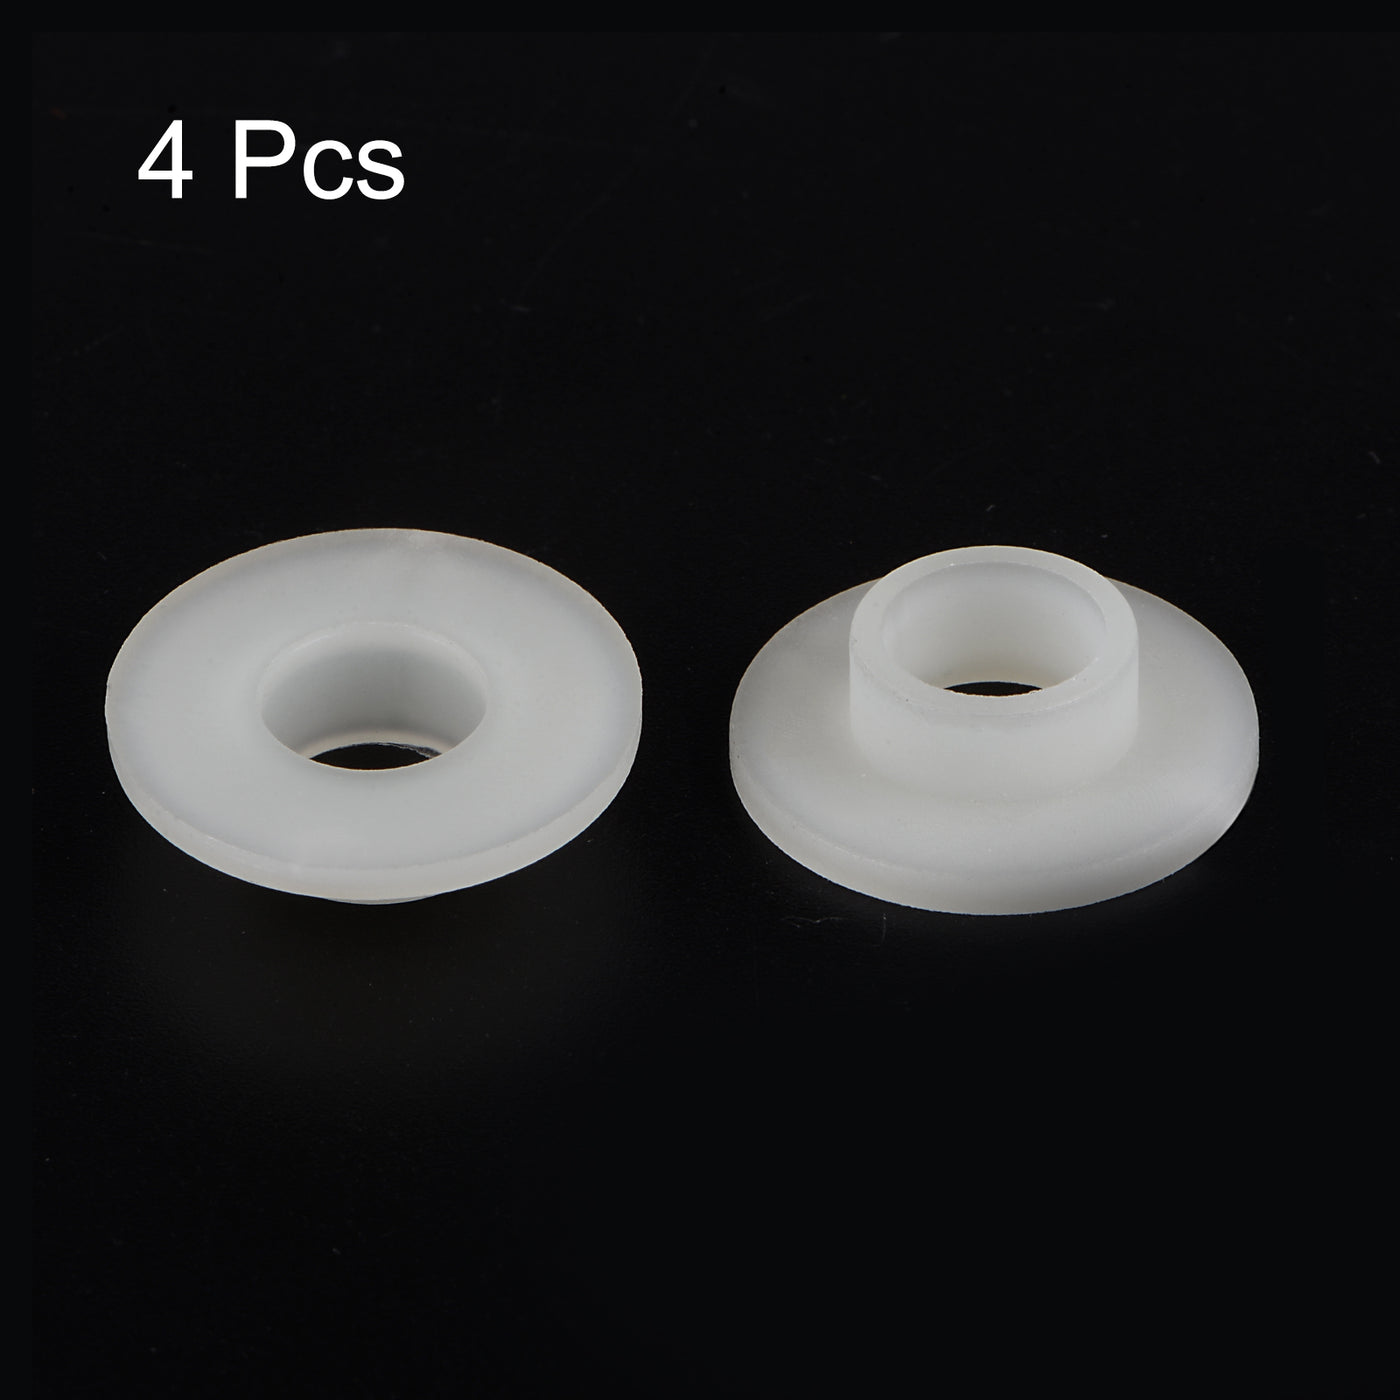 uxcell Uxcell 4pcs Flanged Sleeve Bearings 10.2mm ID 13.1mm OD 7mm Length Nylon Bushing, White